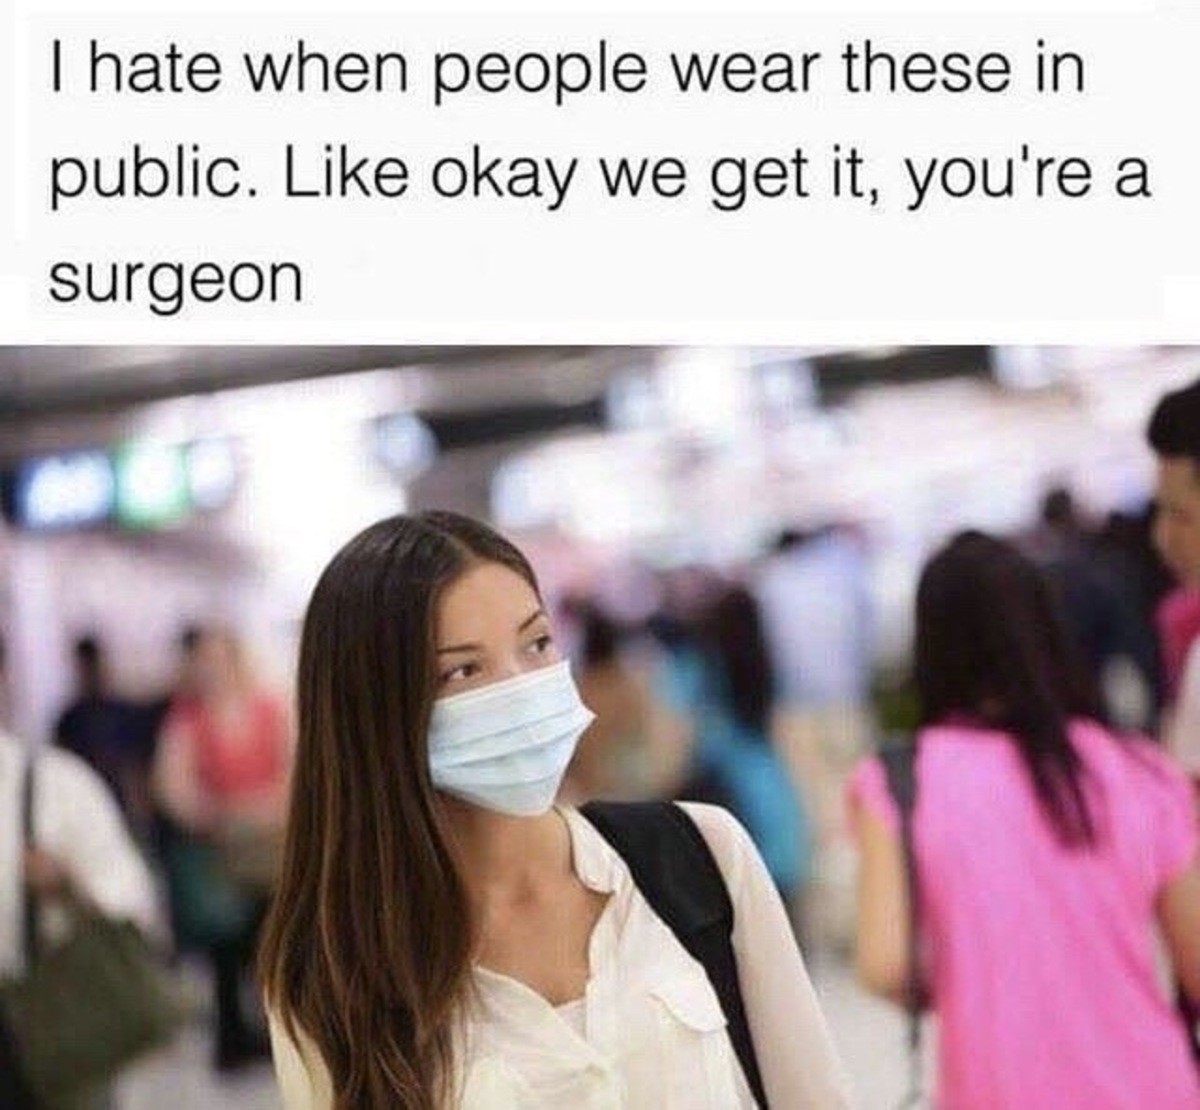 There’s a sudden influx of surgeons every fall. .. I used to think they were wearing them to stop from getting sick. But an Asian friend told me that it's actually sick people who wear them to stop making other 